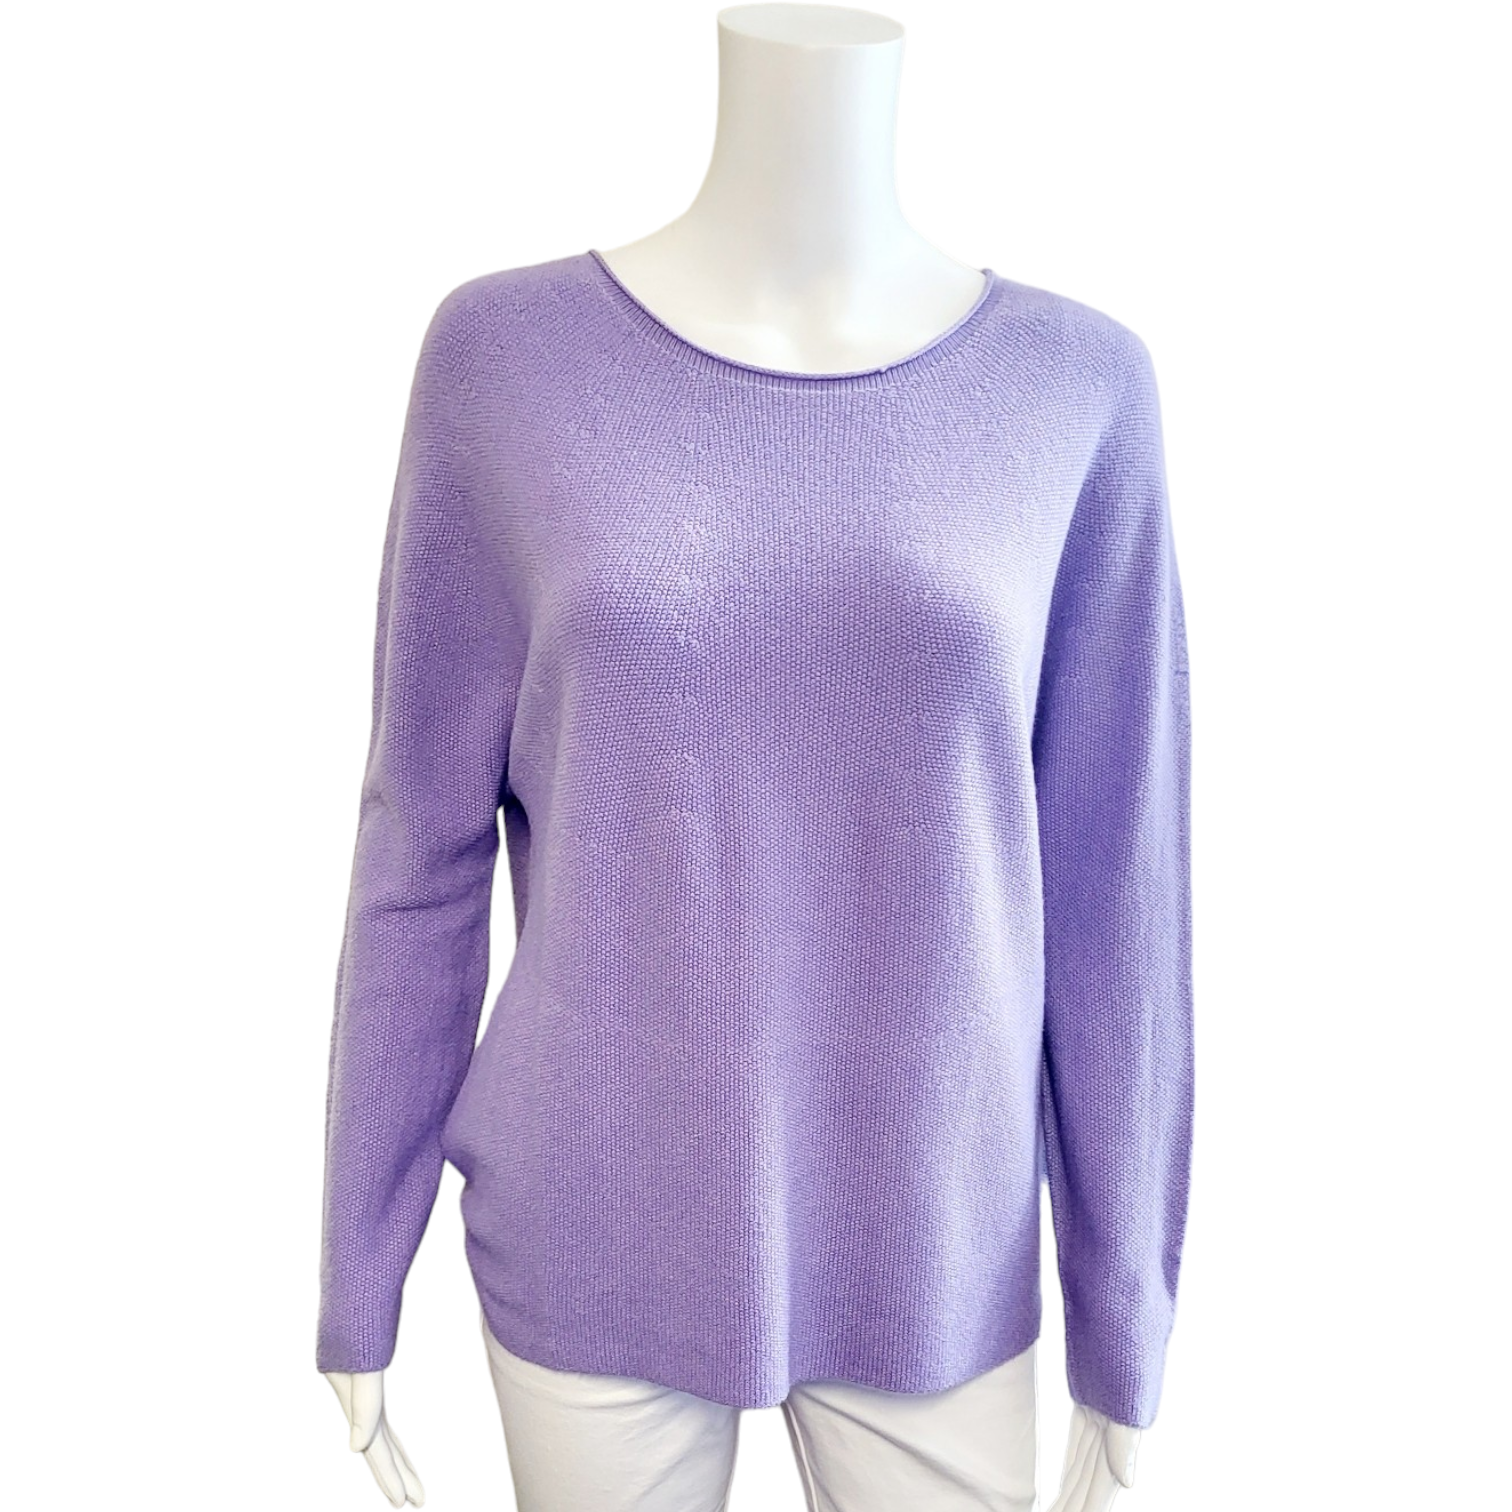 lilac long sleeved jumper with long sleeves